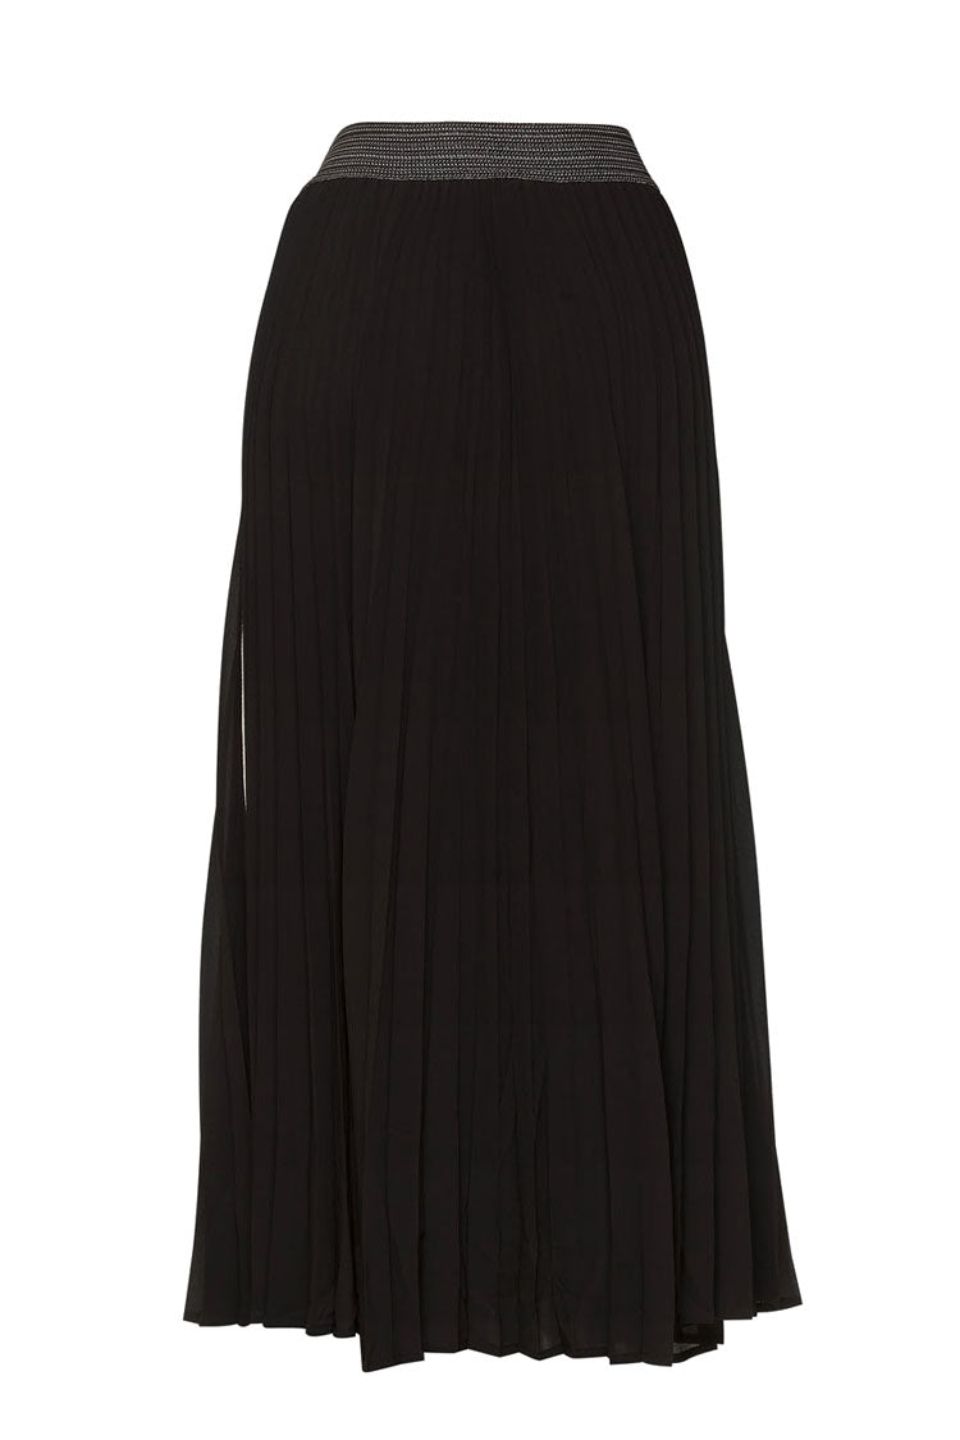 Just Pleat It Skirt in Black or Taupe